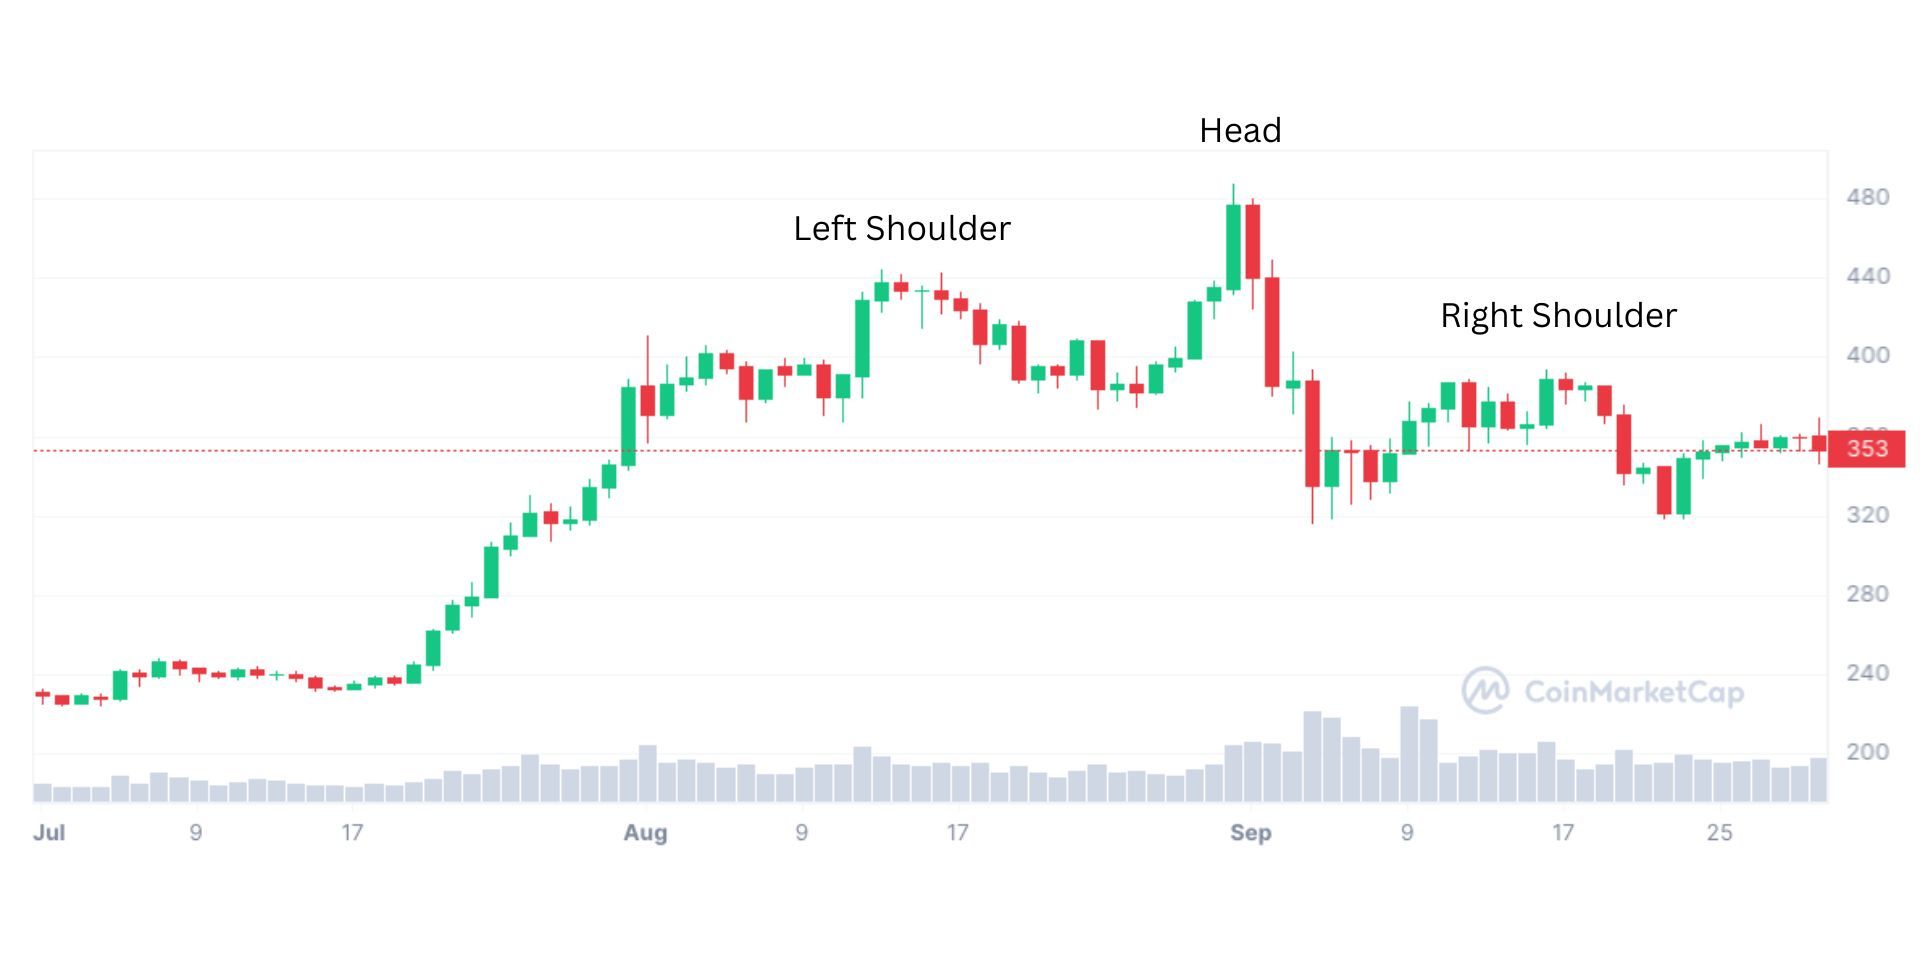 candlestick chart of ethereum prices with labels